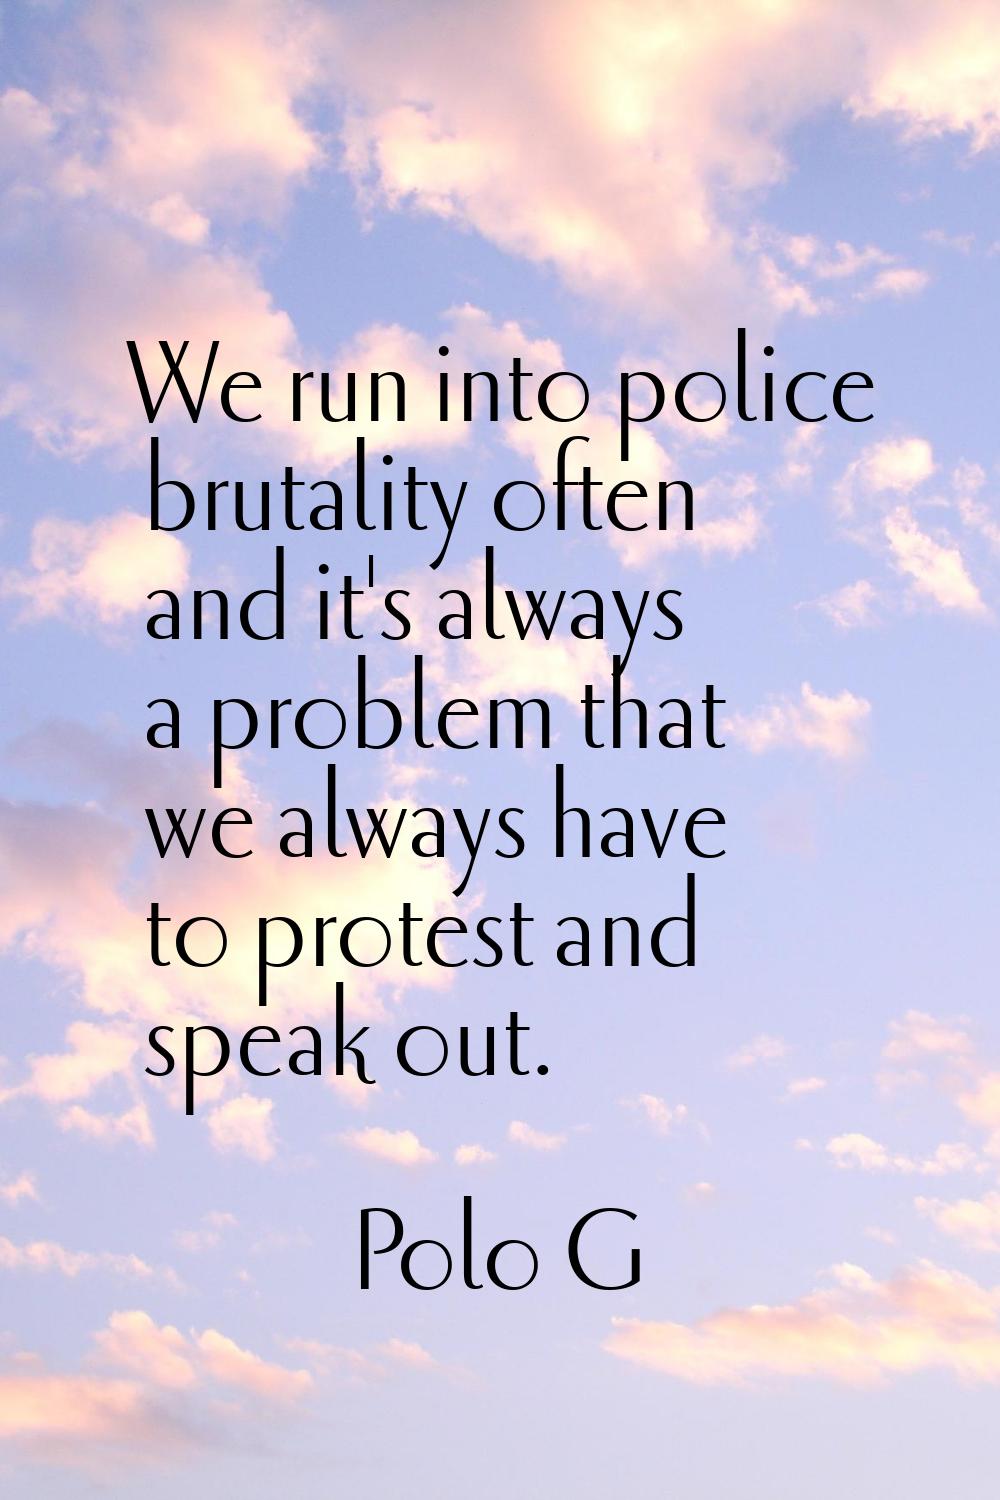 We run into police brutality often and it's always a problem that we always have to protest and spe